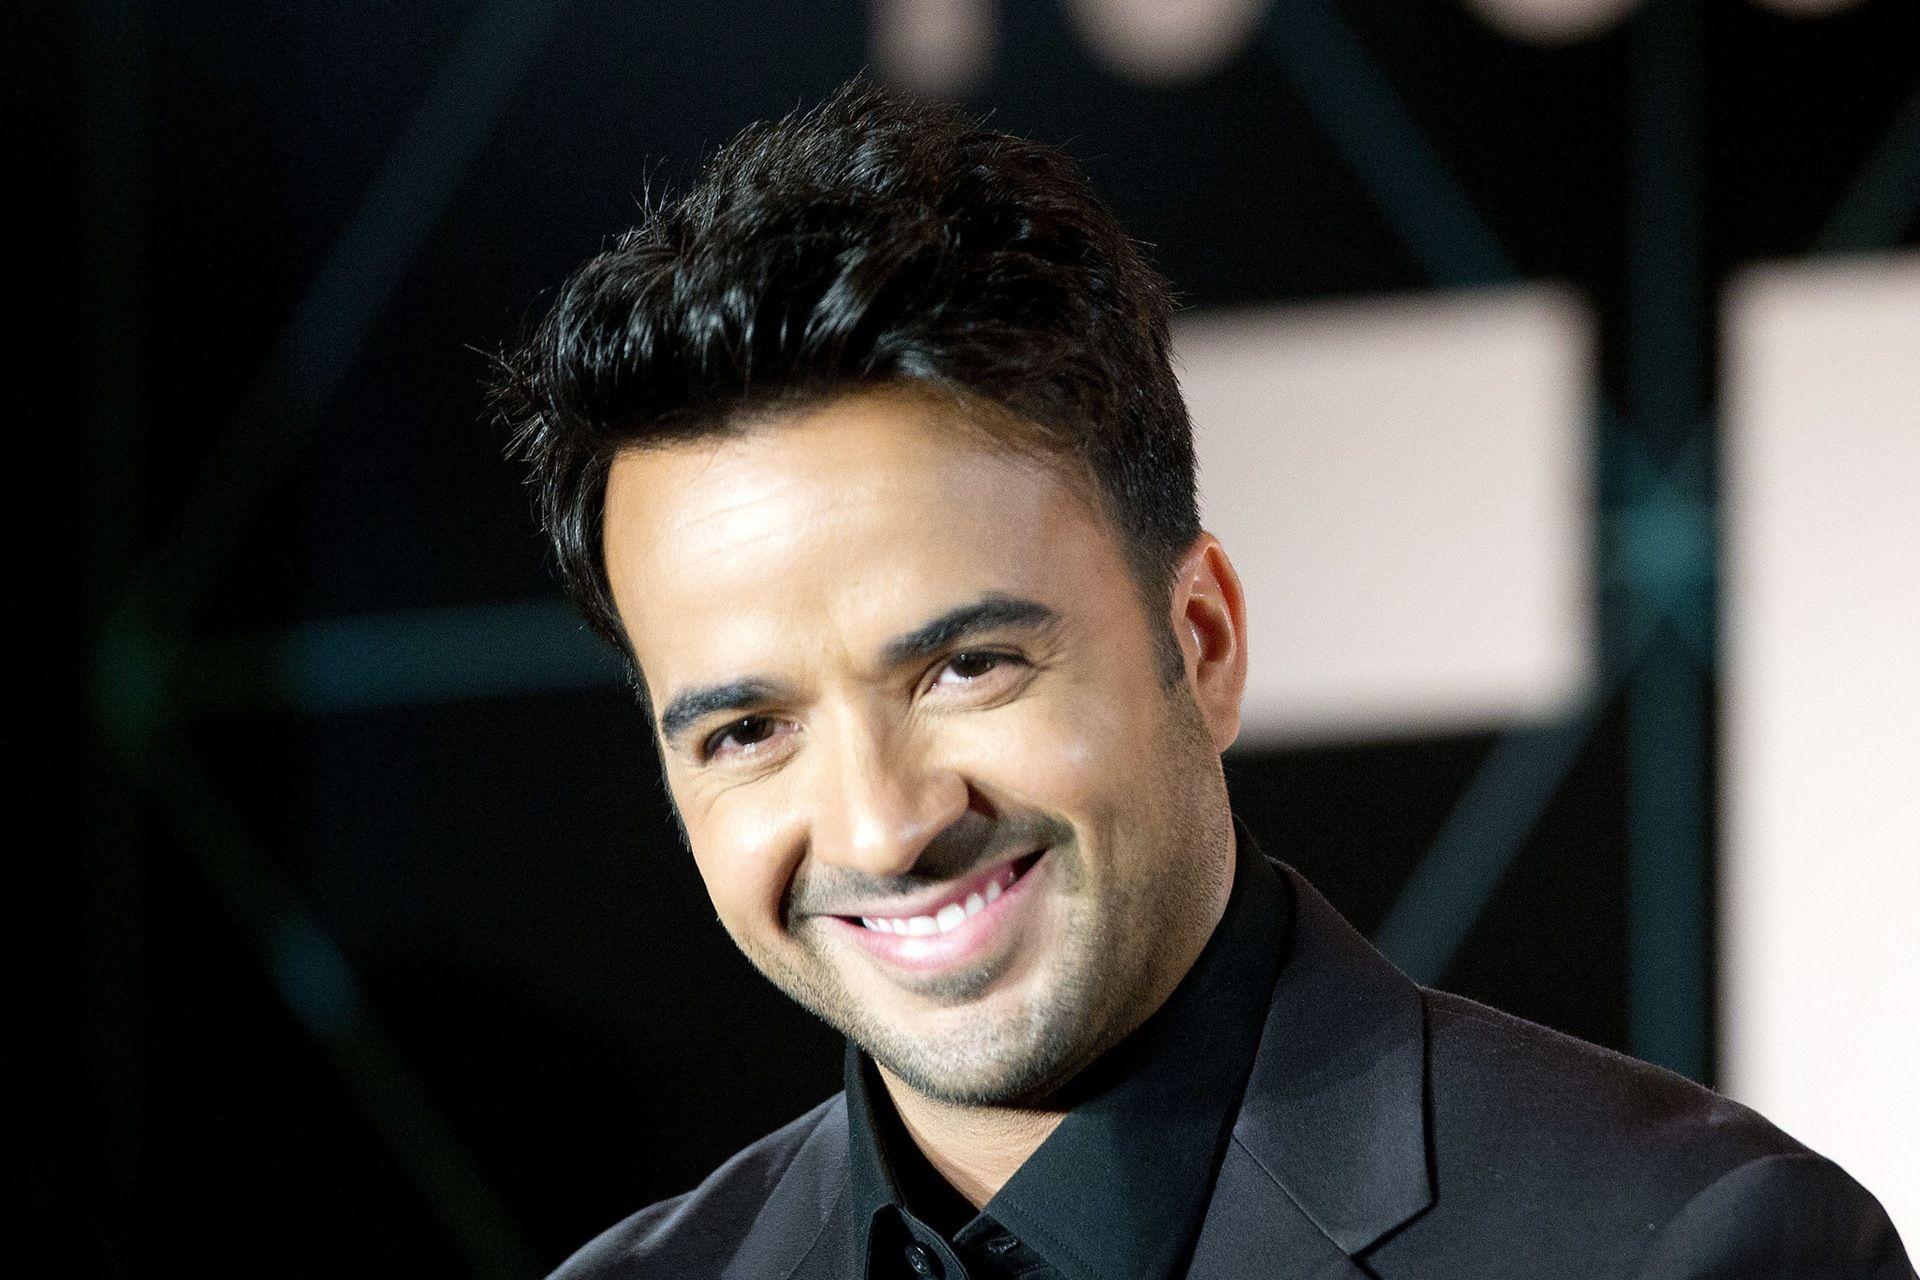 Luis Fonsi Backgrounds Wallpapers 22494.